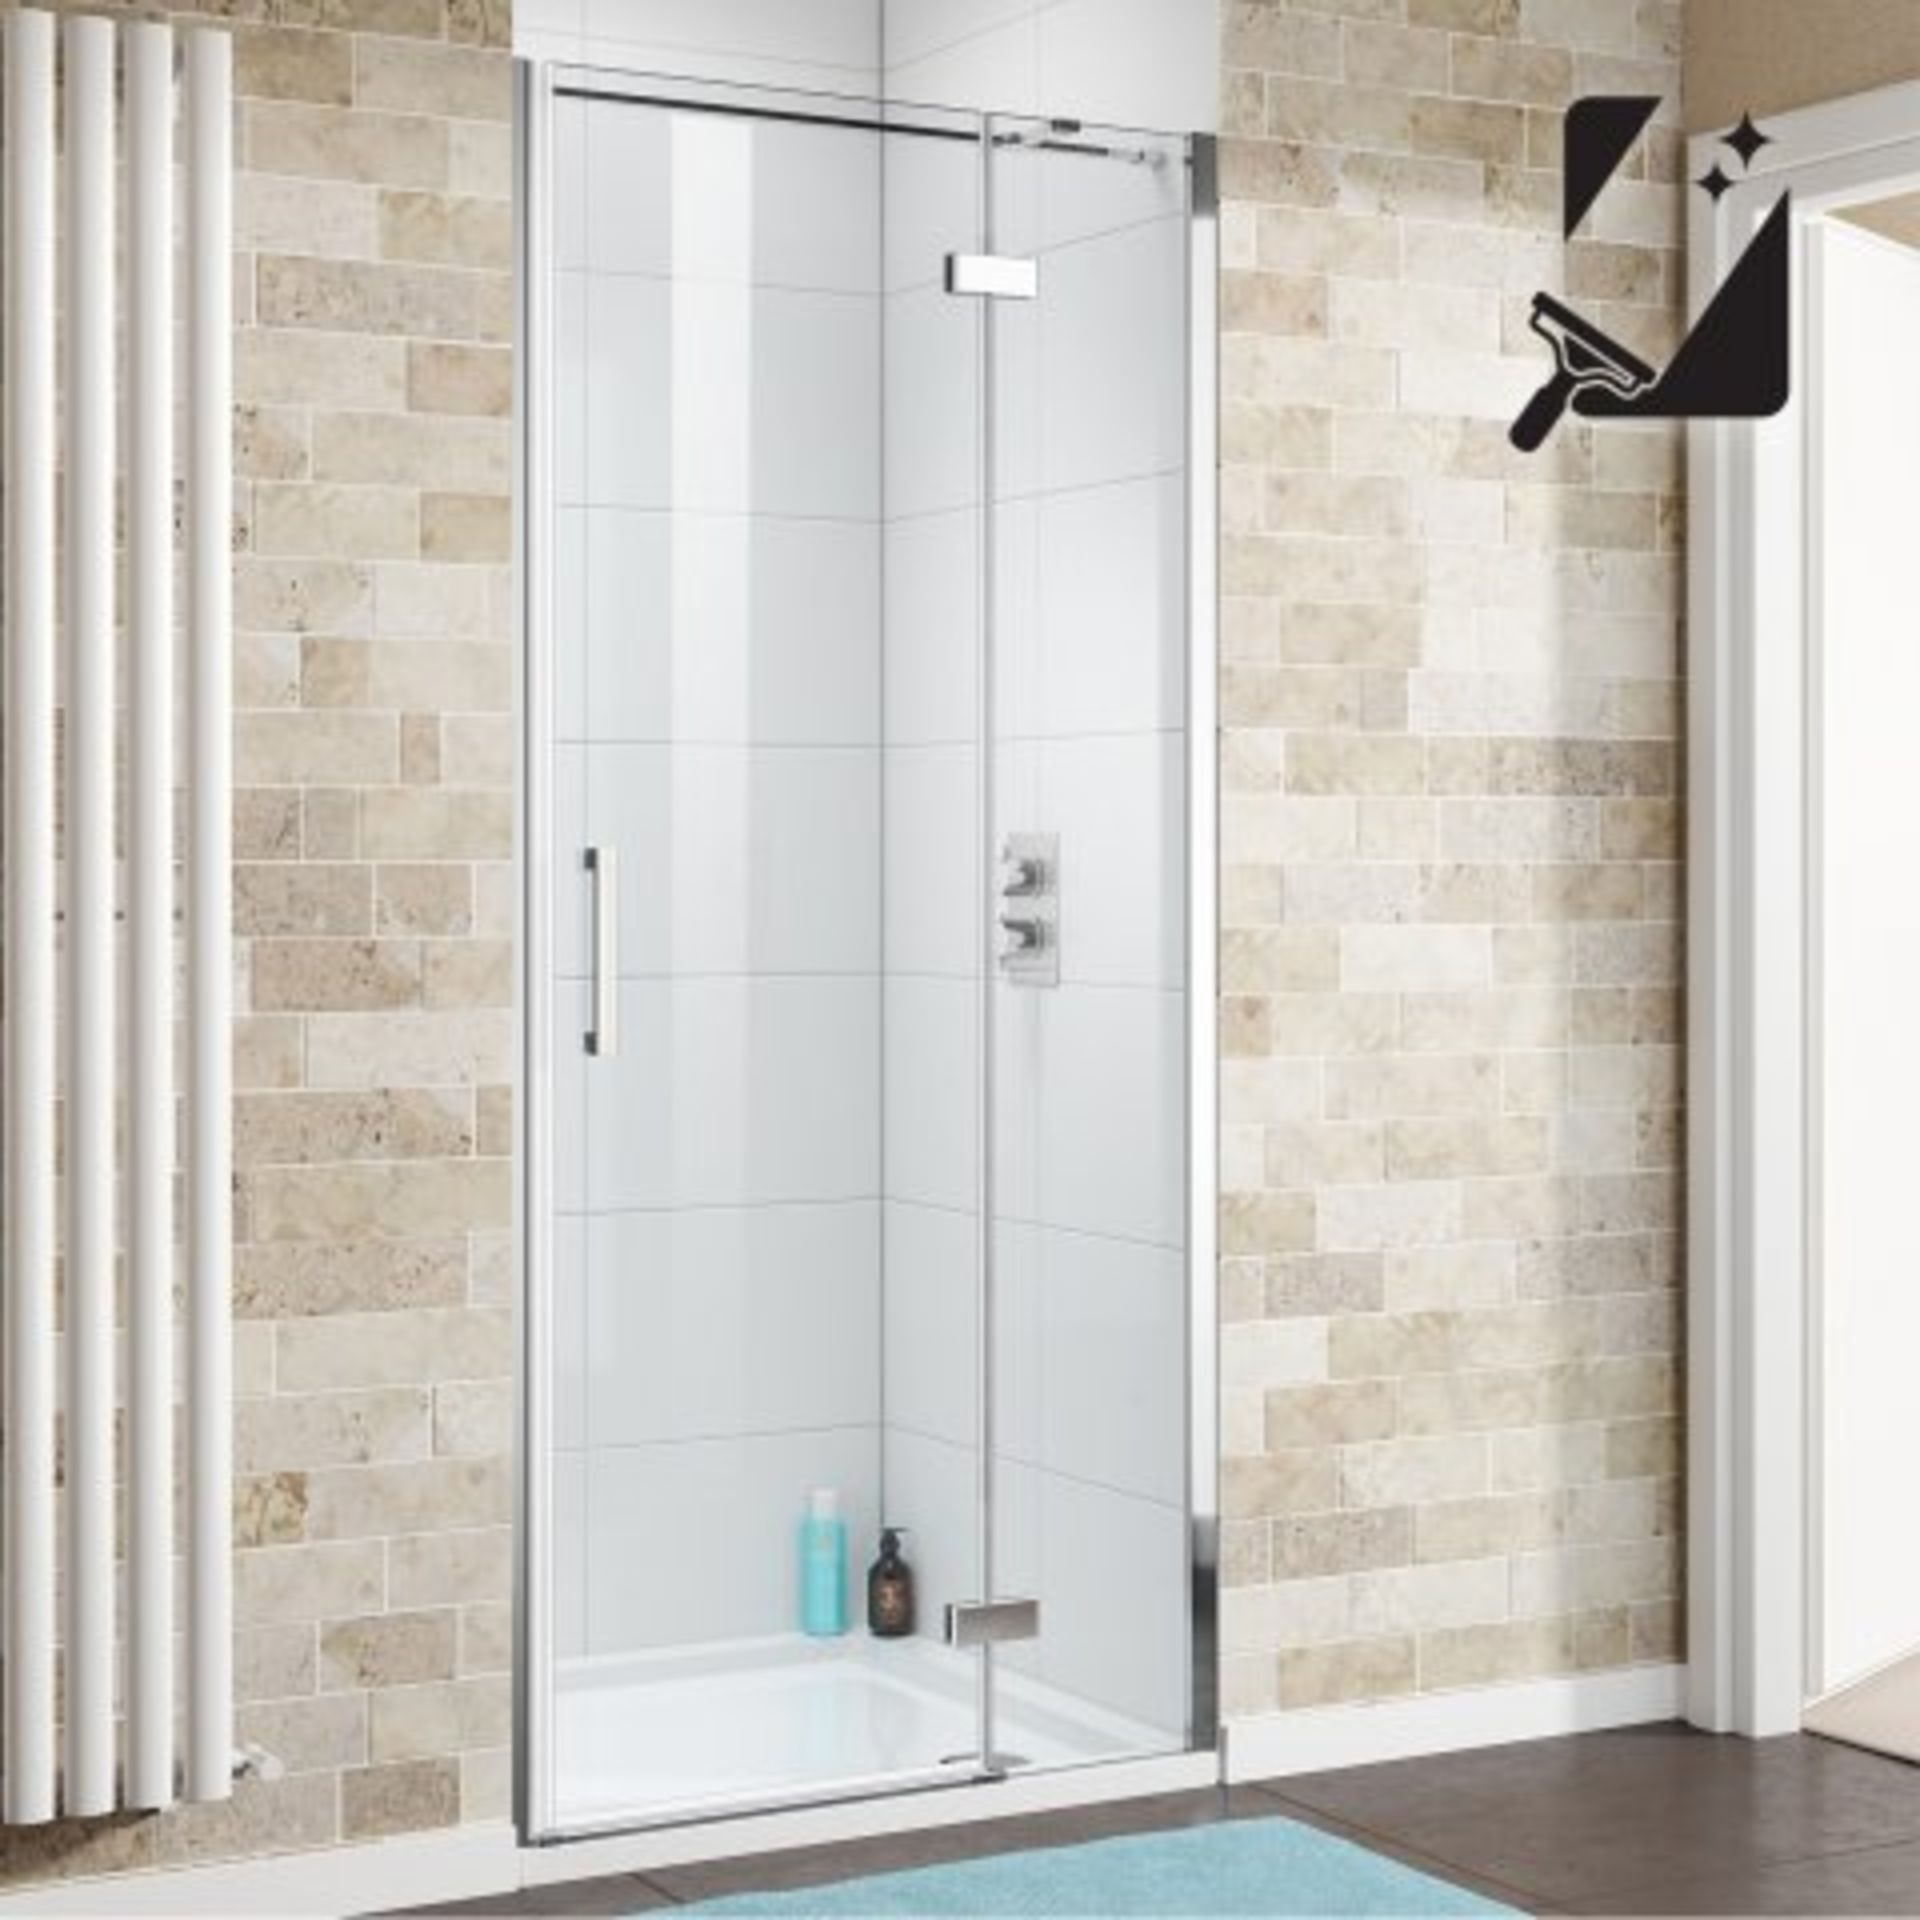 (M27) 800mm - 8mm - Premium EasyClean Hinged Shower Door. RRP £499.99. Marrying function with the